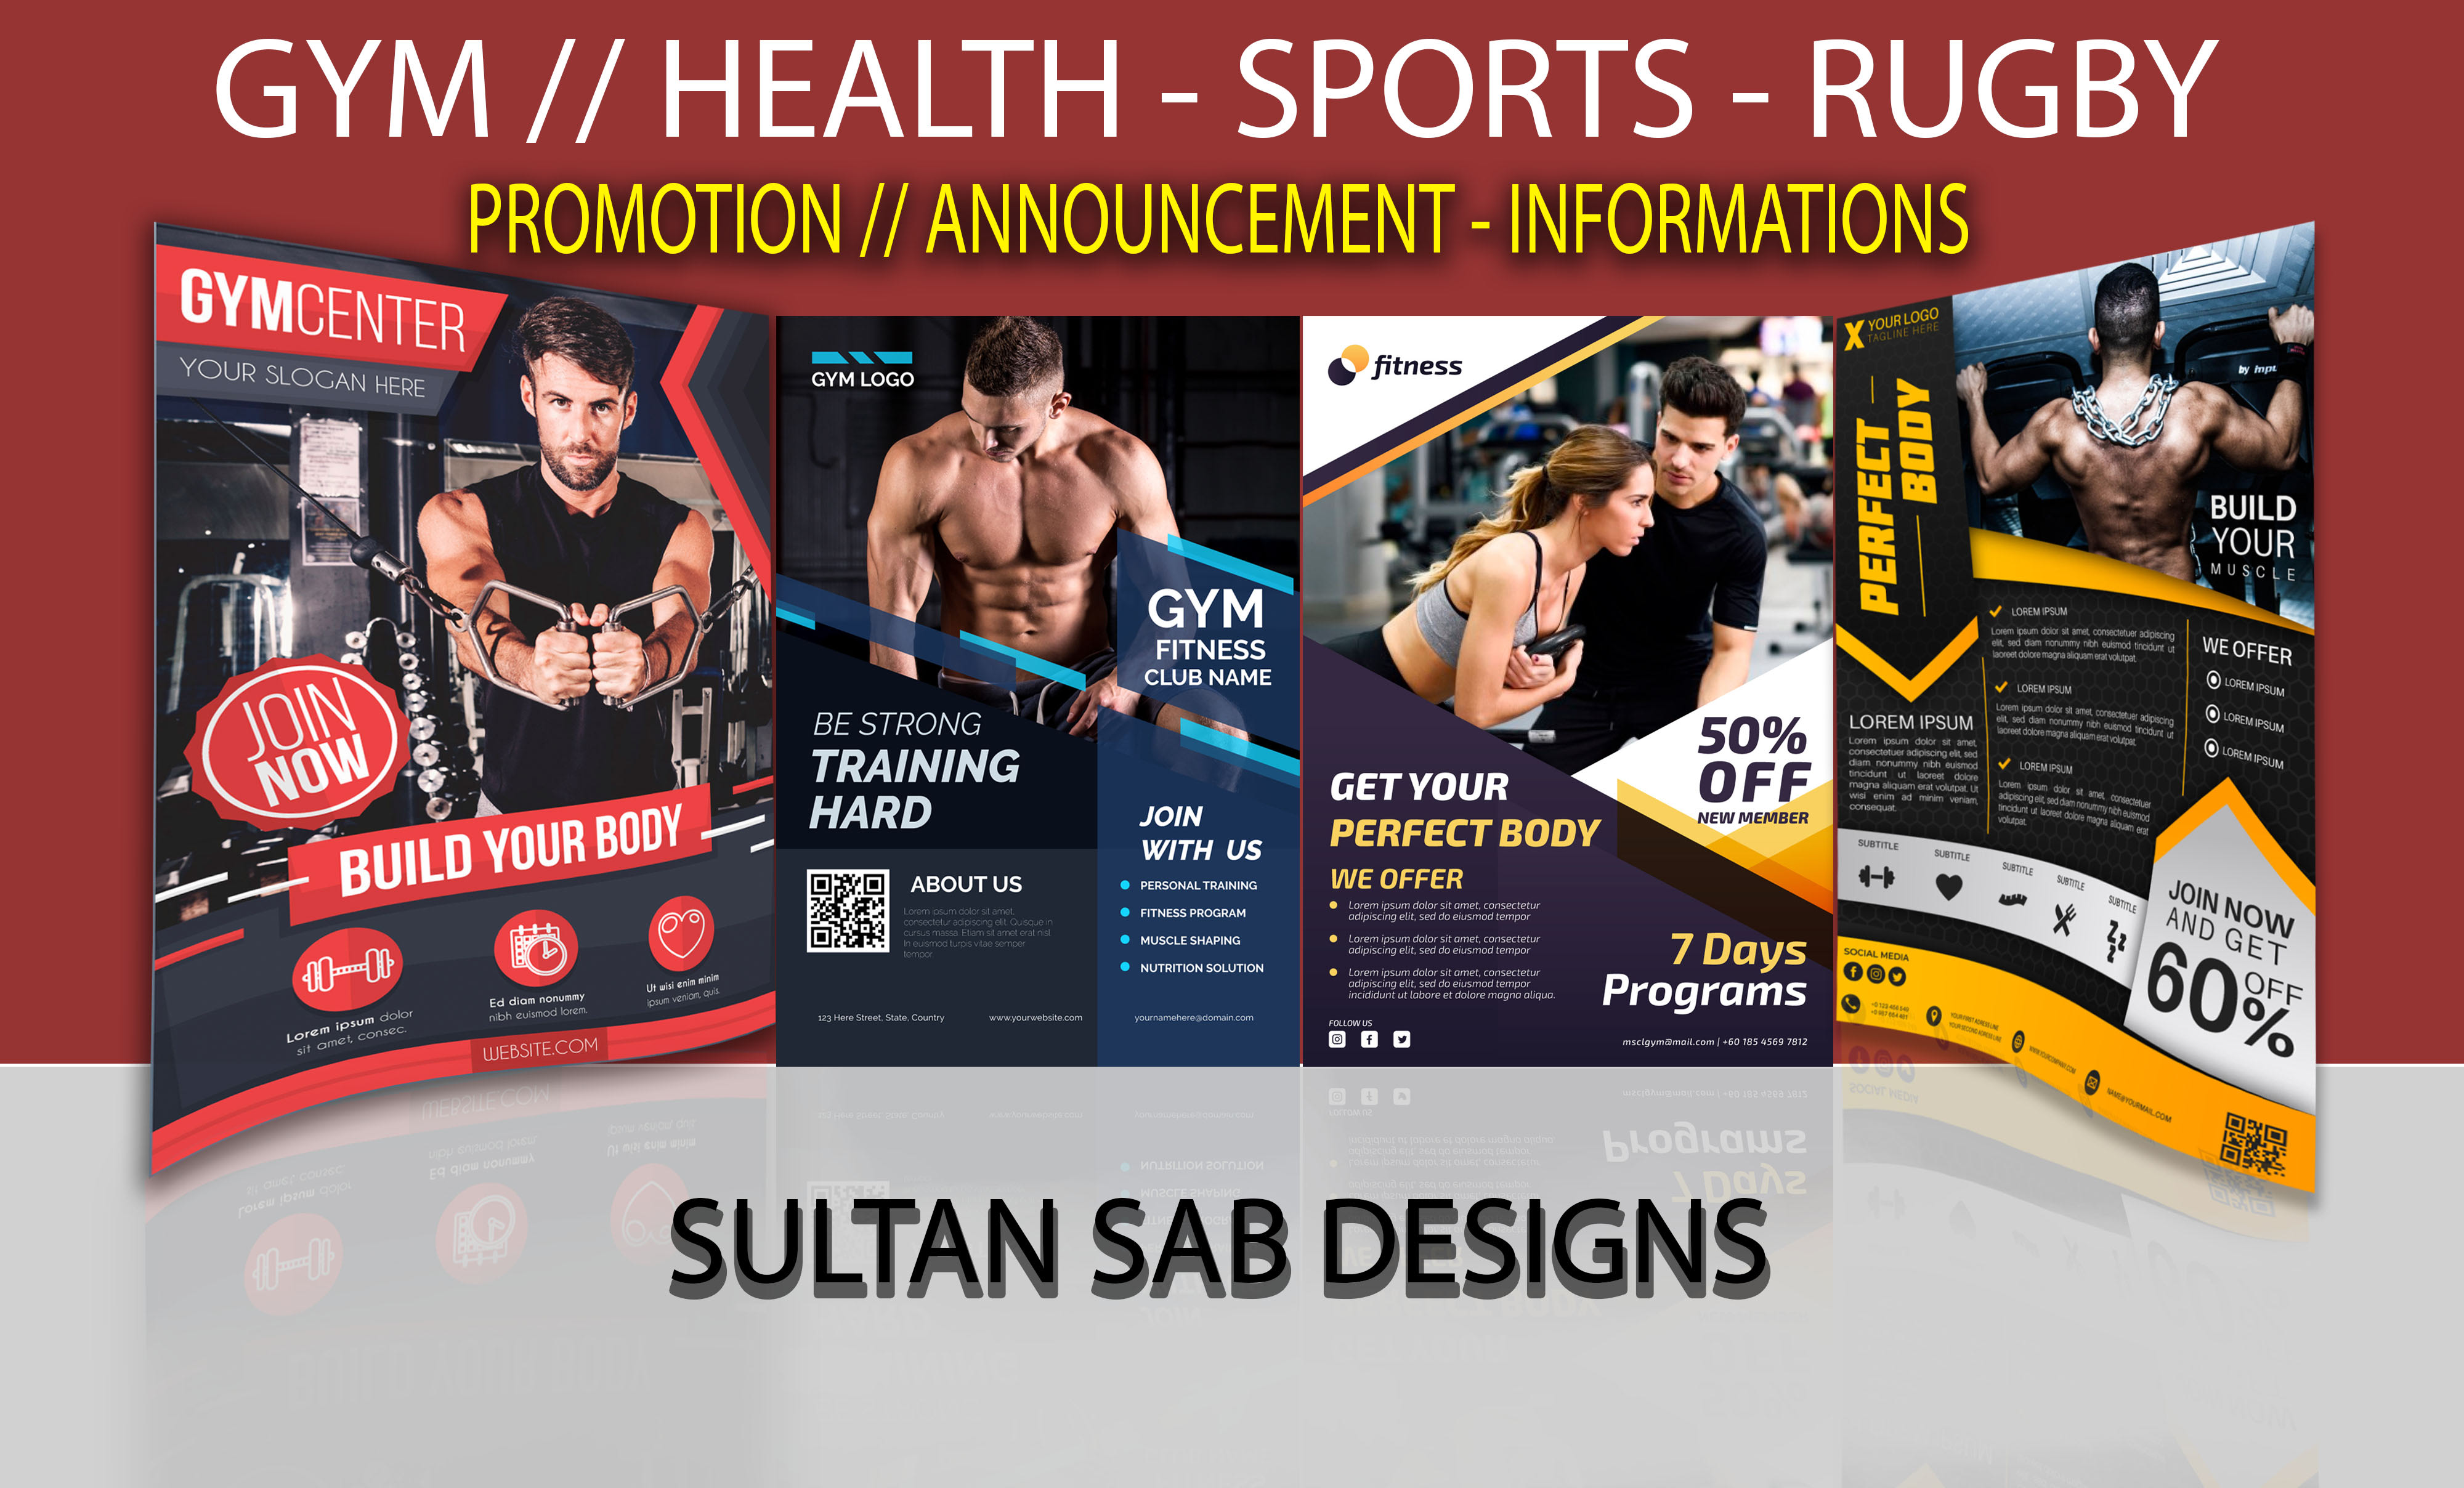 Customize Fitness Club Flyer Template